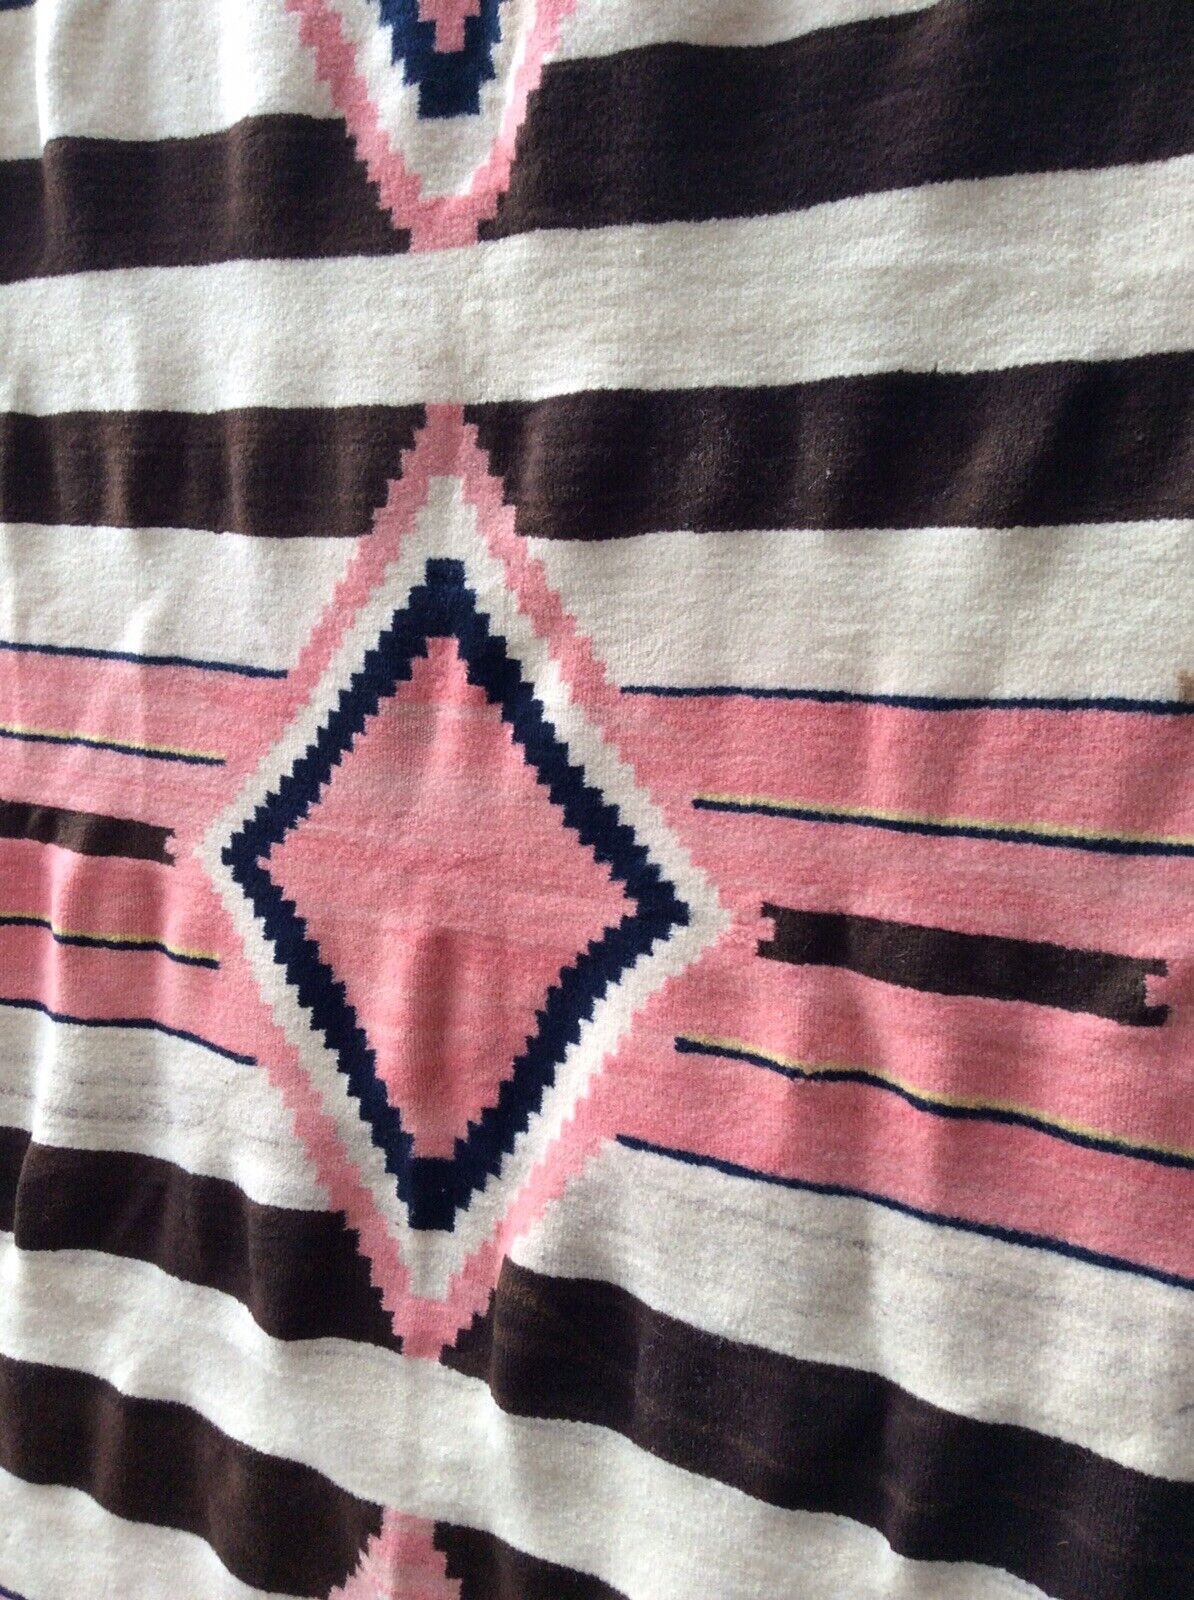 Navajo Rug Late Classic Native American Indian Chief’s Blanket Third Phase 1870